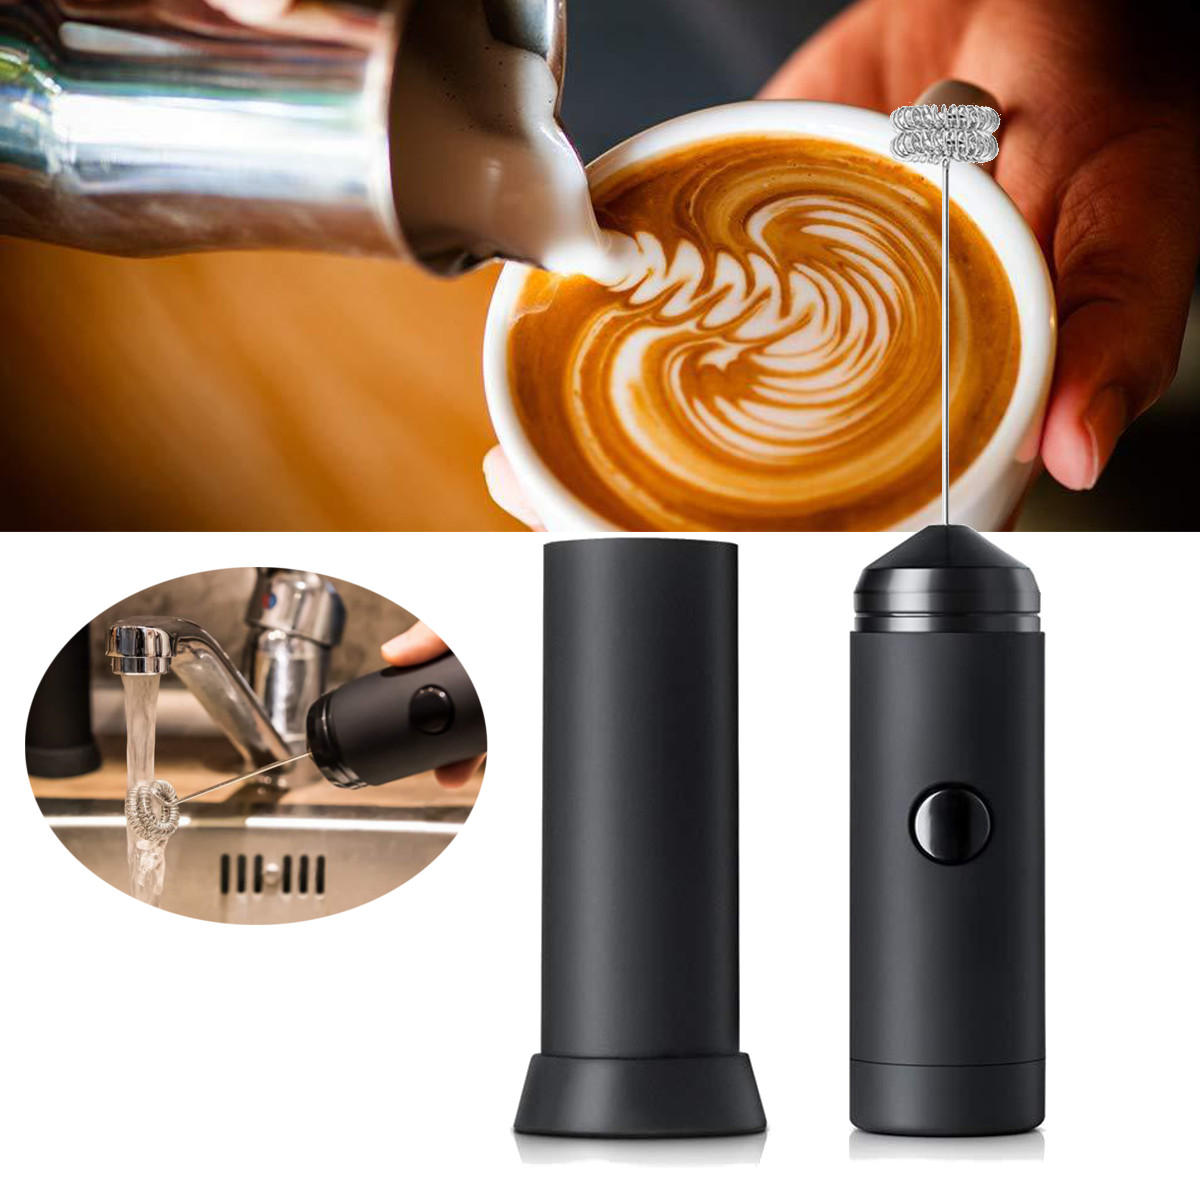 

Handheld Electric Milk Frother Coffee Latte Foamer Whisk Egg Mixer Foamer Mixer Whisk Tool